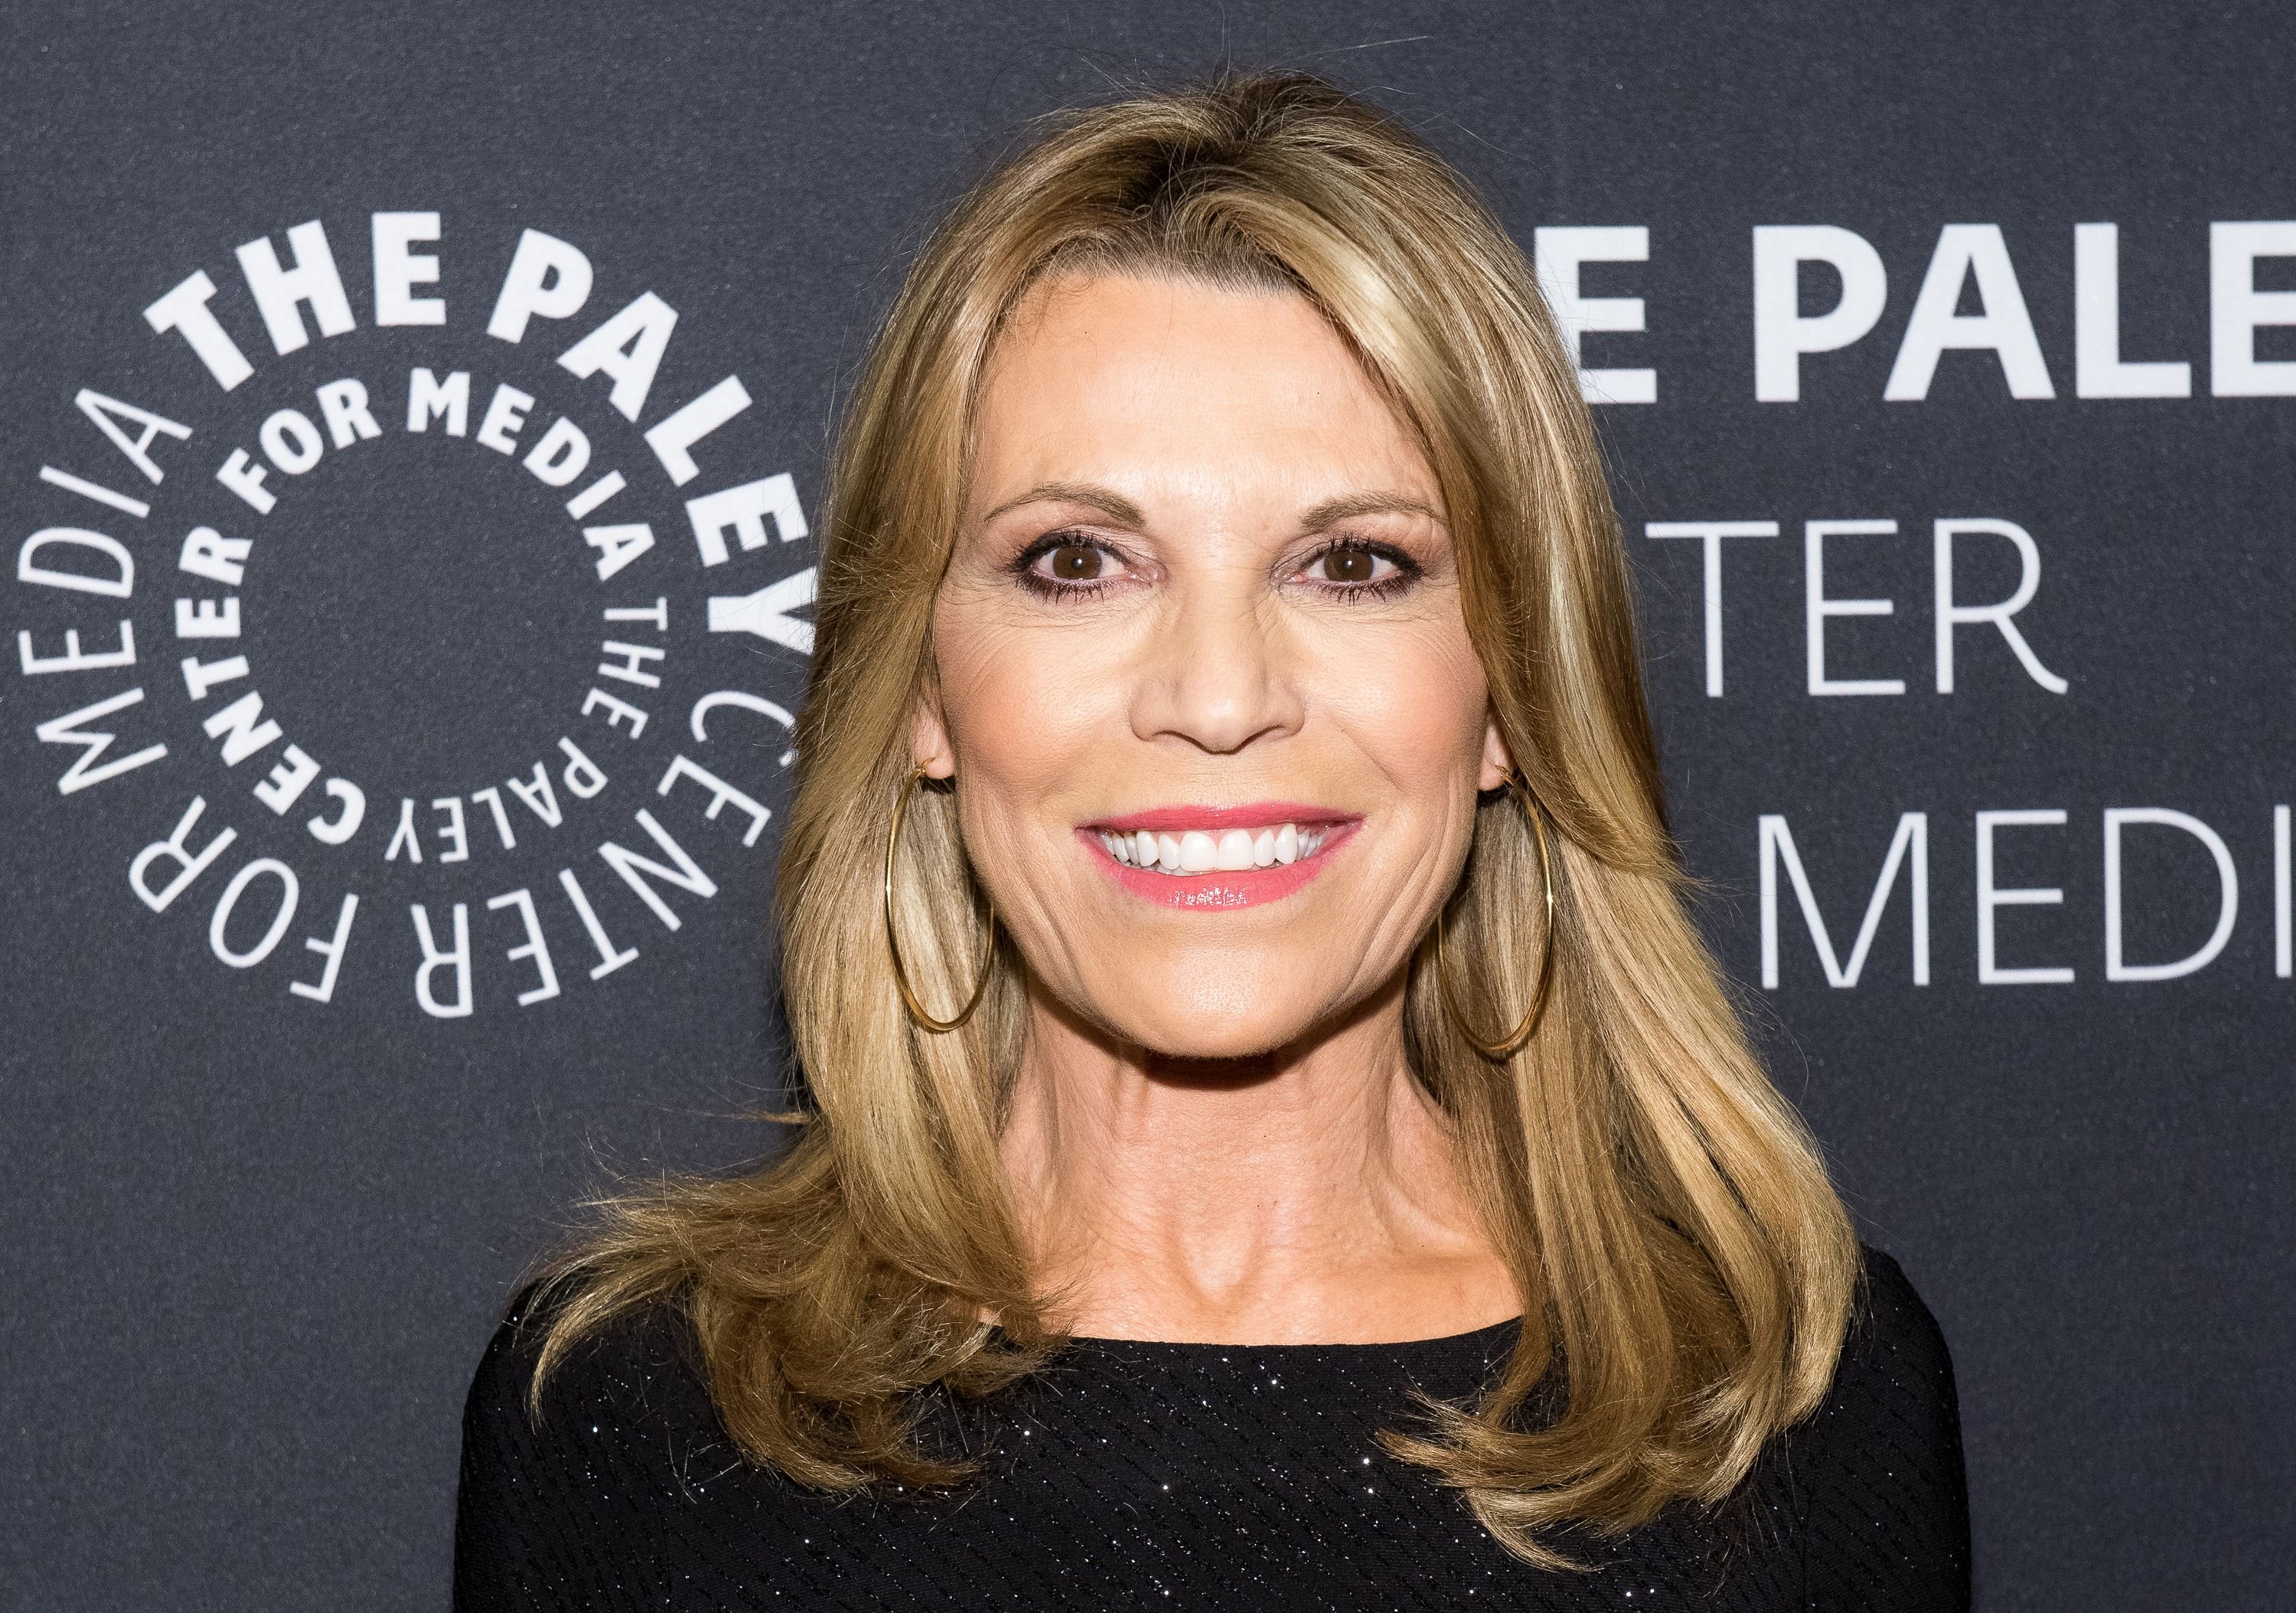 Vanna White at The Paley Center For Media Presents: Wheel Of Fortune: 35 Years As America's Game at The Paley Center for Media on November 15, 2017 | Photo: Getty Images